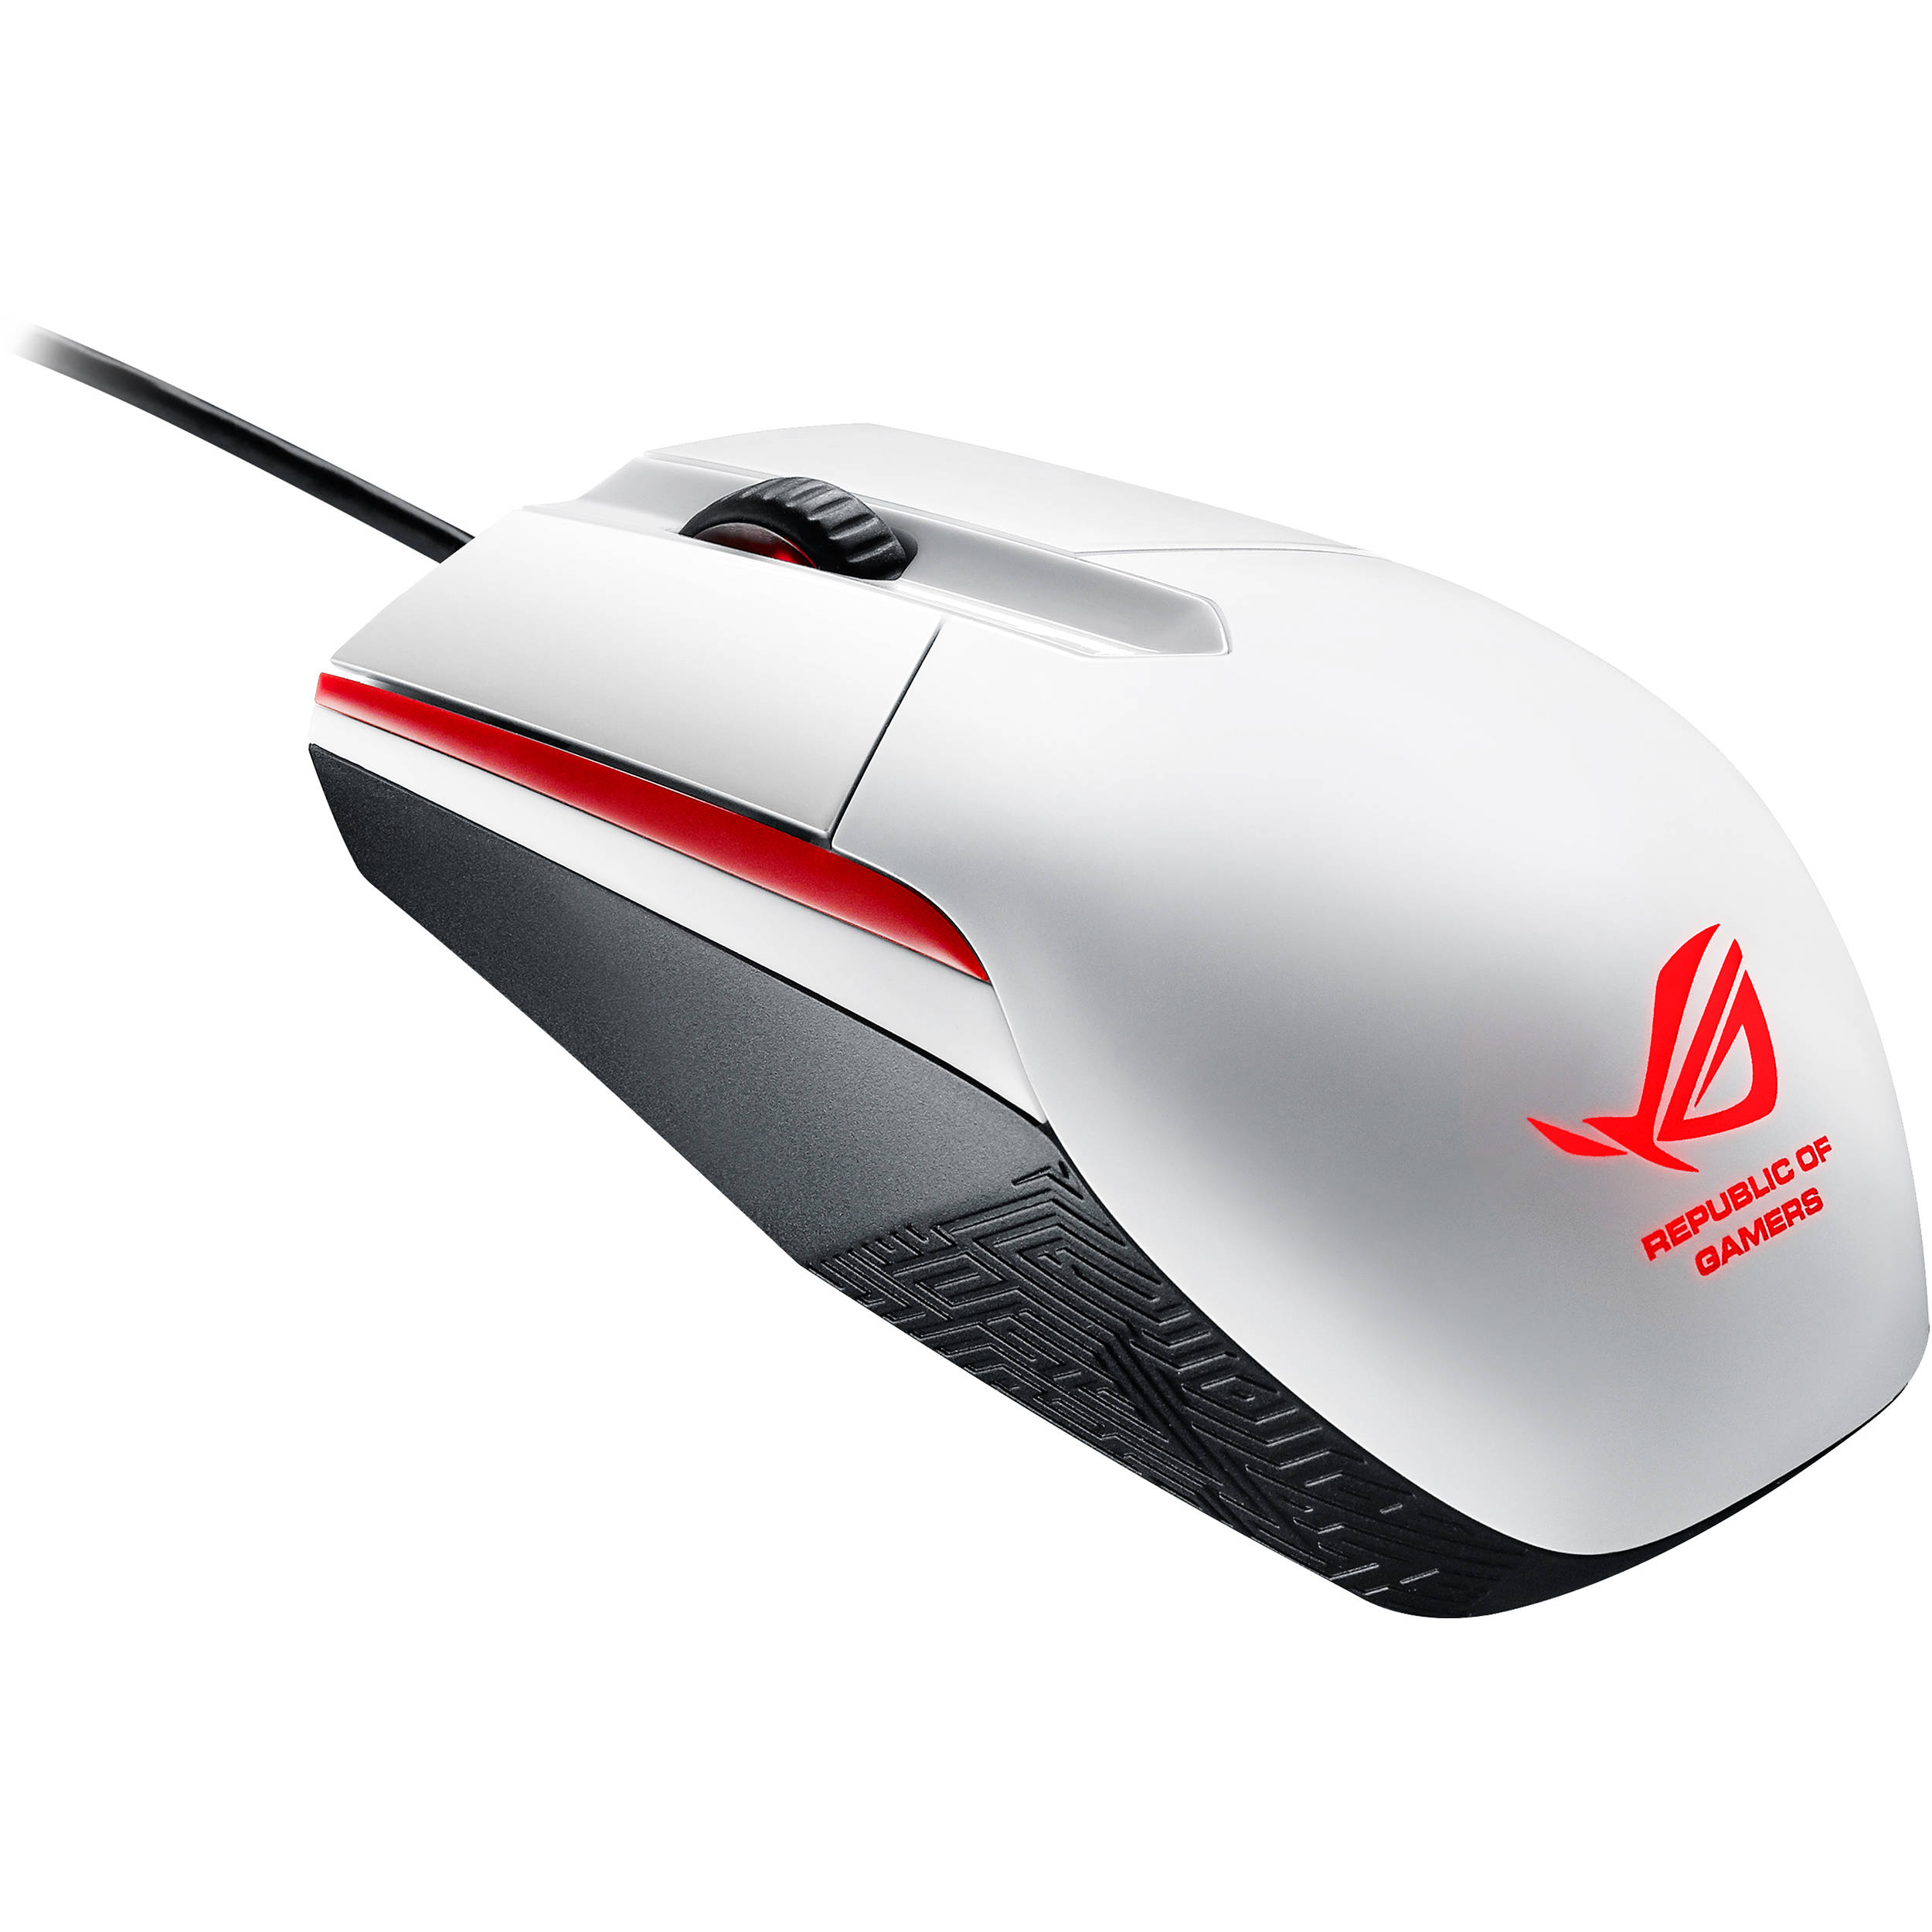 Asus Republic Of Gamers Sica Mouse White Rog Sica White B H